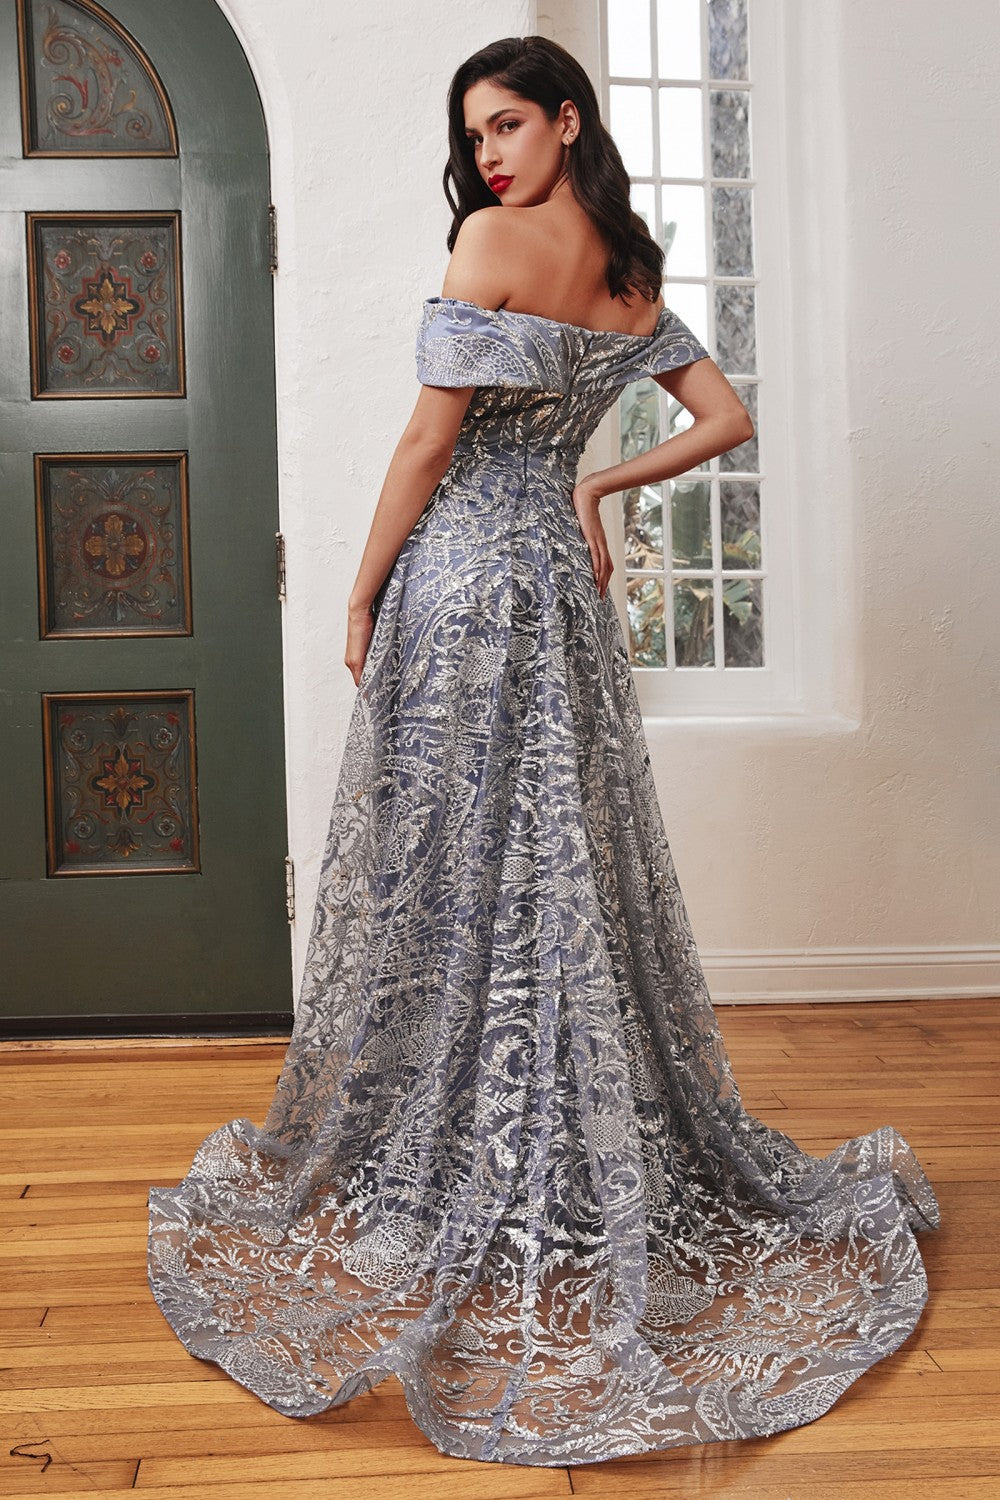 Smoky-blue_1 Off The Shoulder with Over Skirt Gown J836 - Women Evening Formal Gown - Special Occasion-Curves